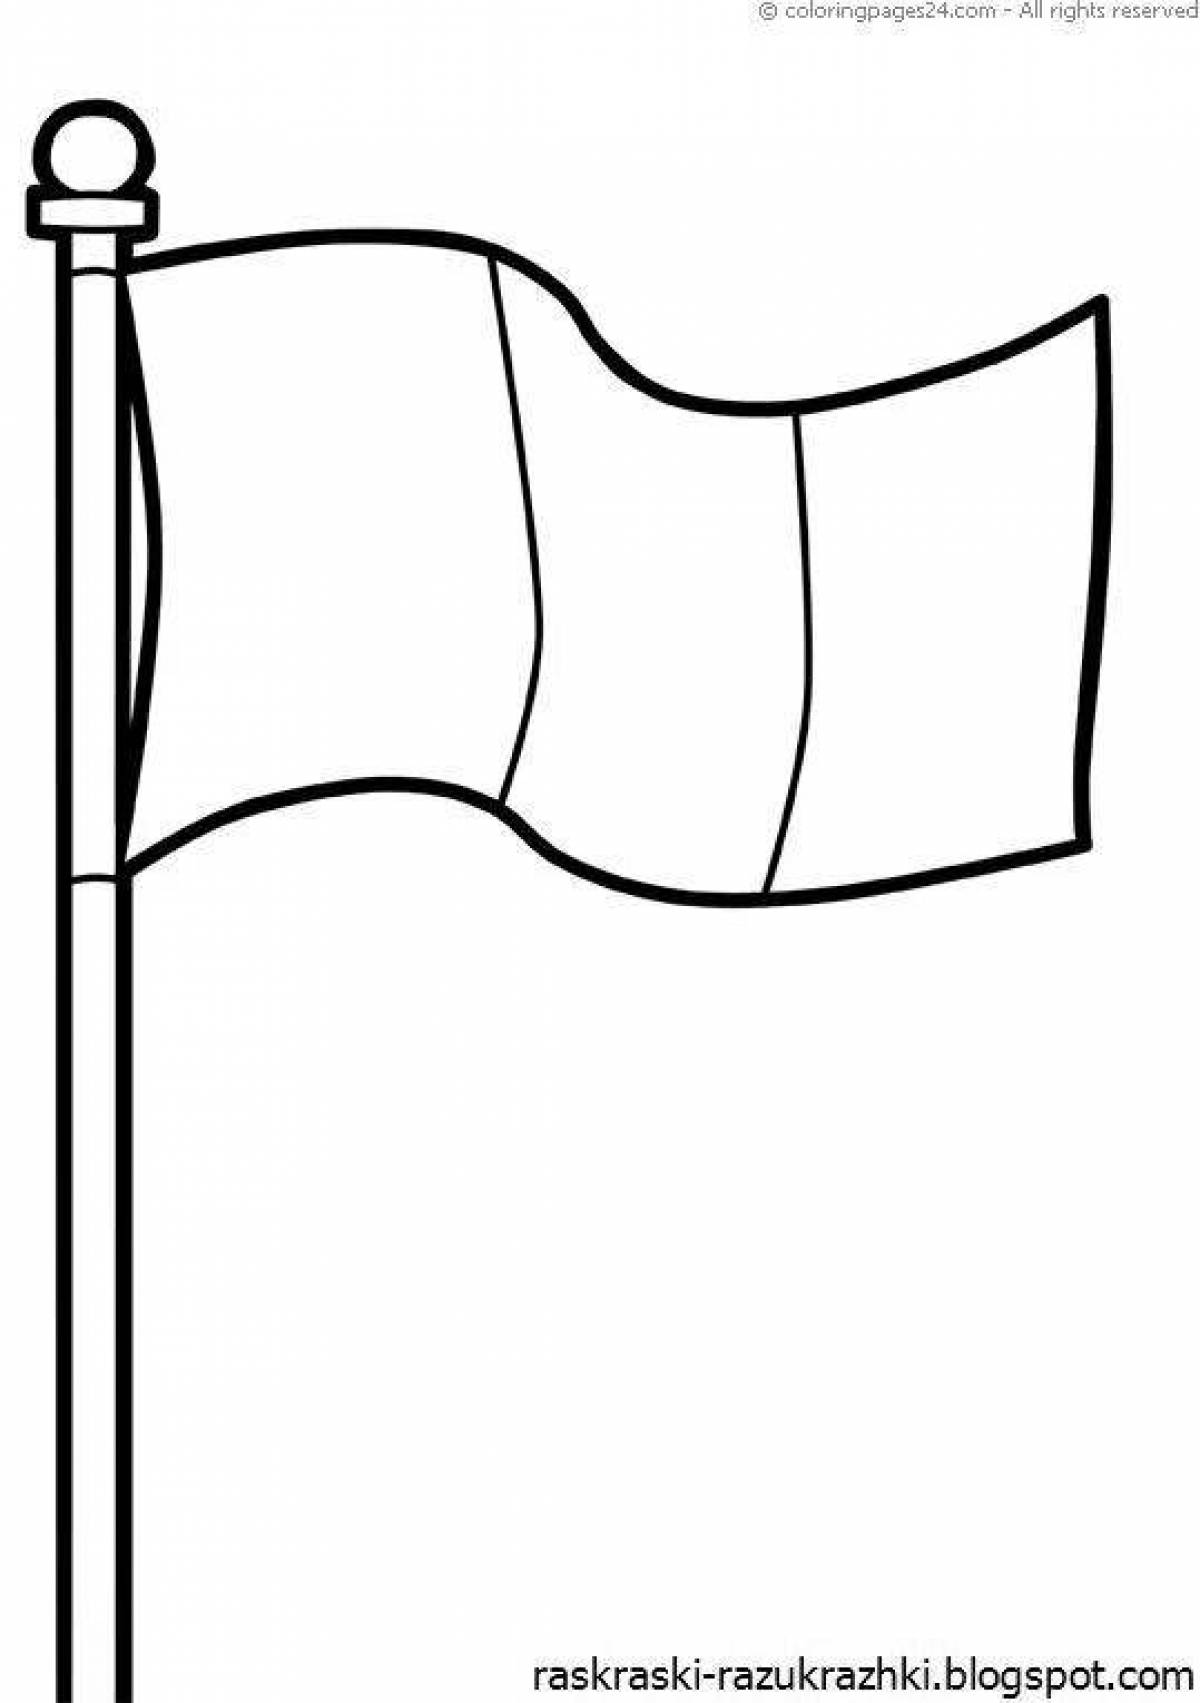 Fabulous italy flag coloring page